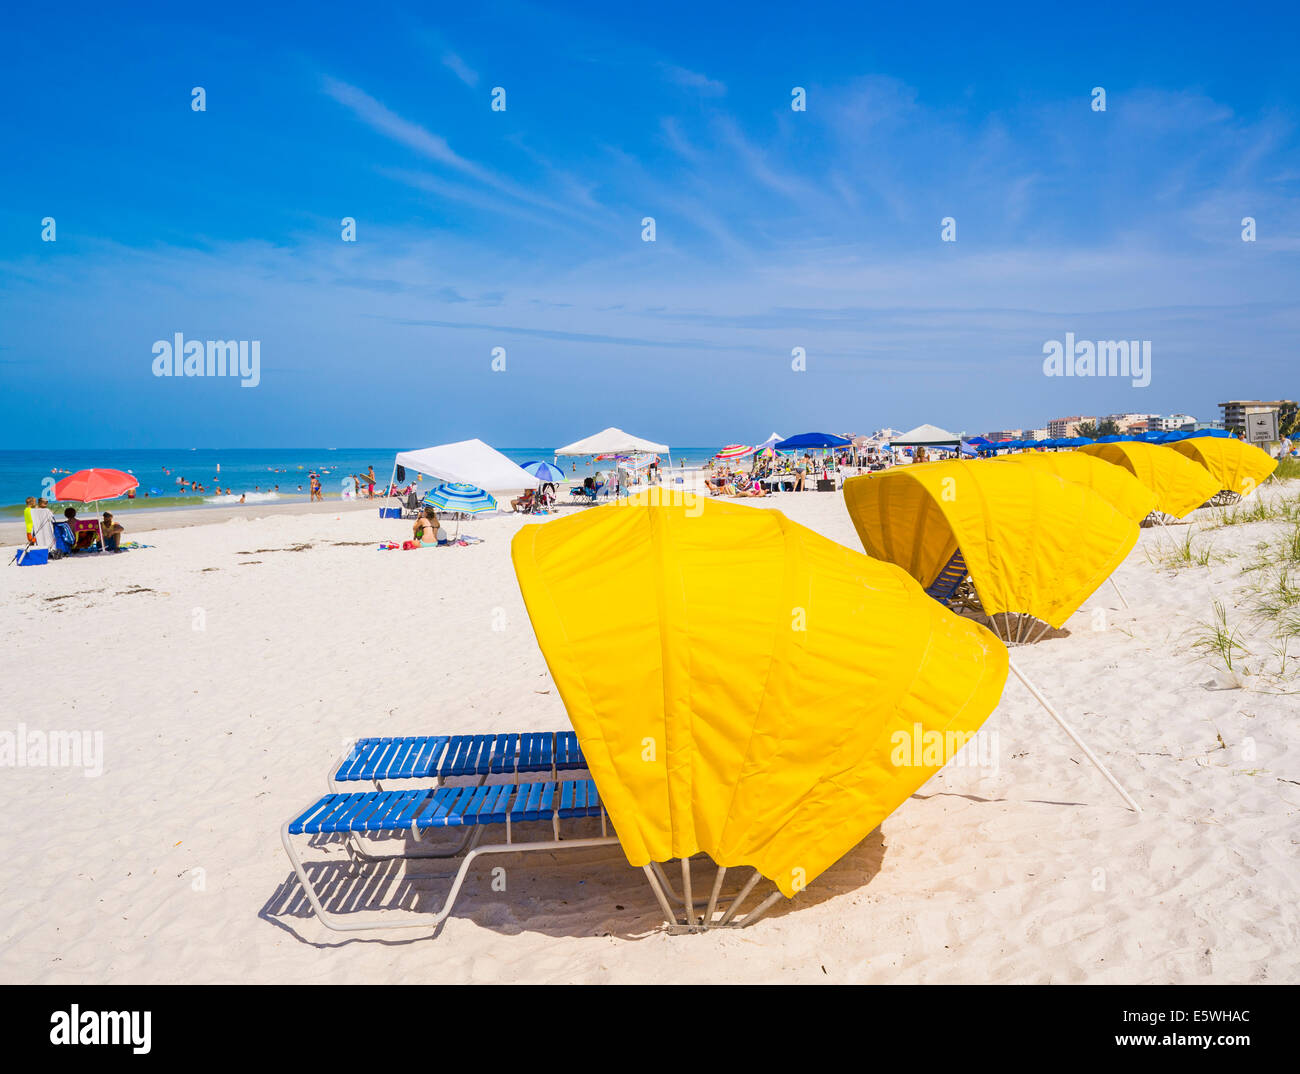 Florida beach - People sunbathing and rows of sunbeds with bright yellow shades on the beautiful Madeira Beach in Florida, USA Stock Photo